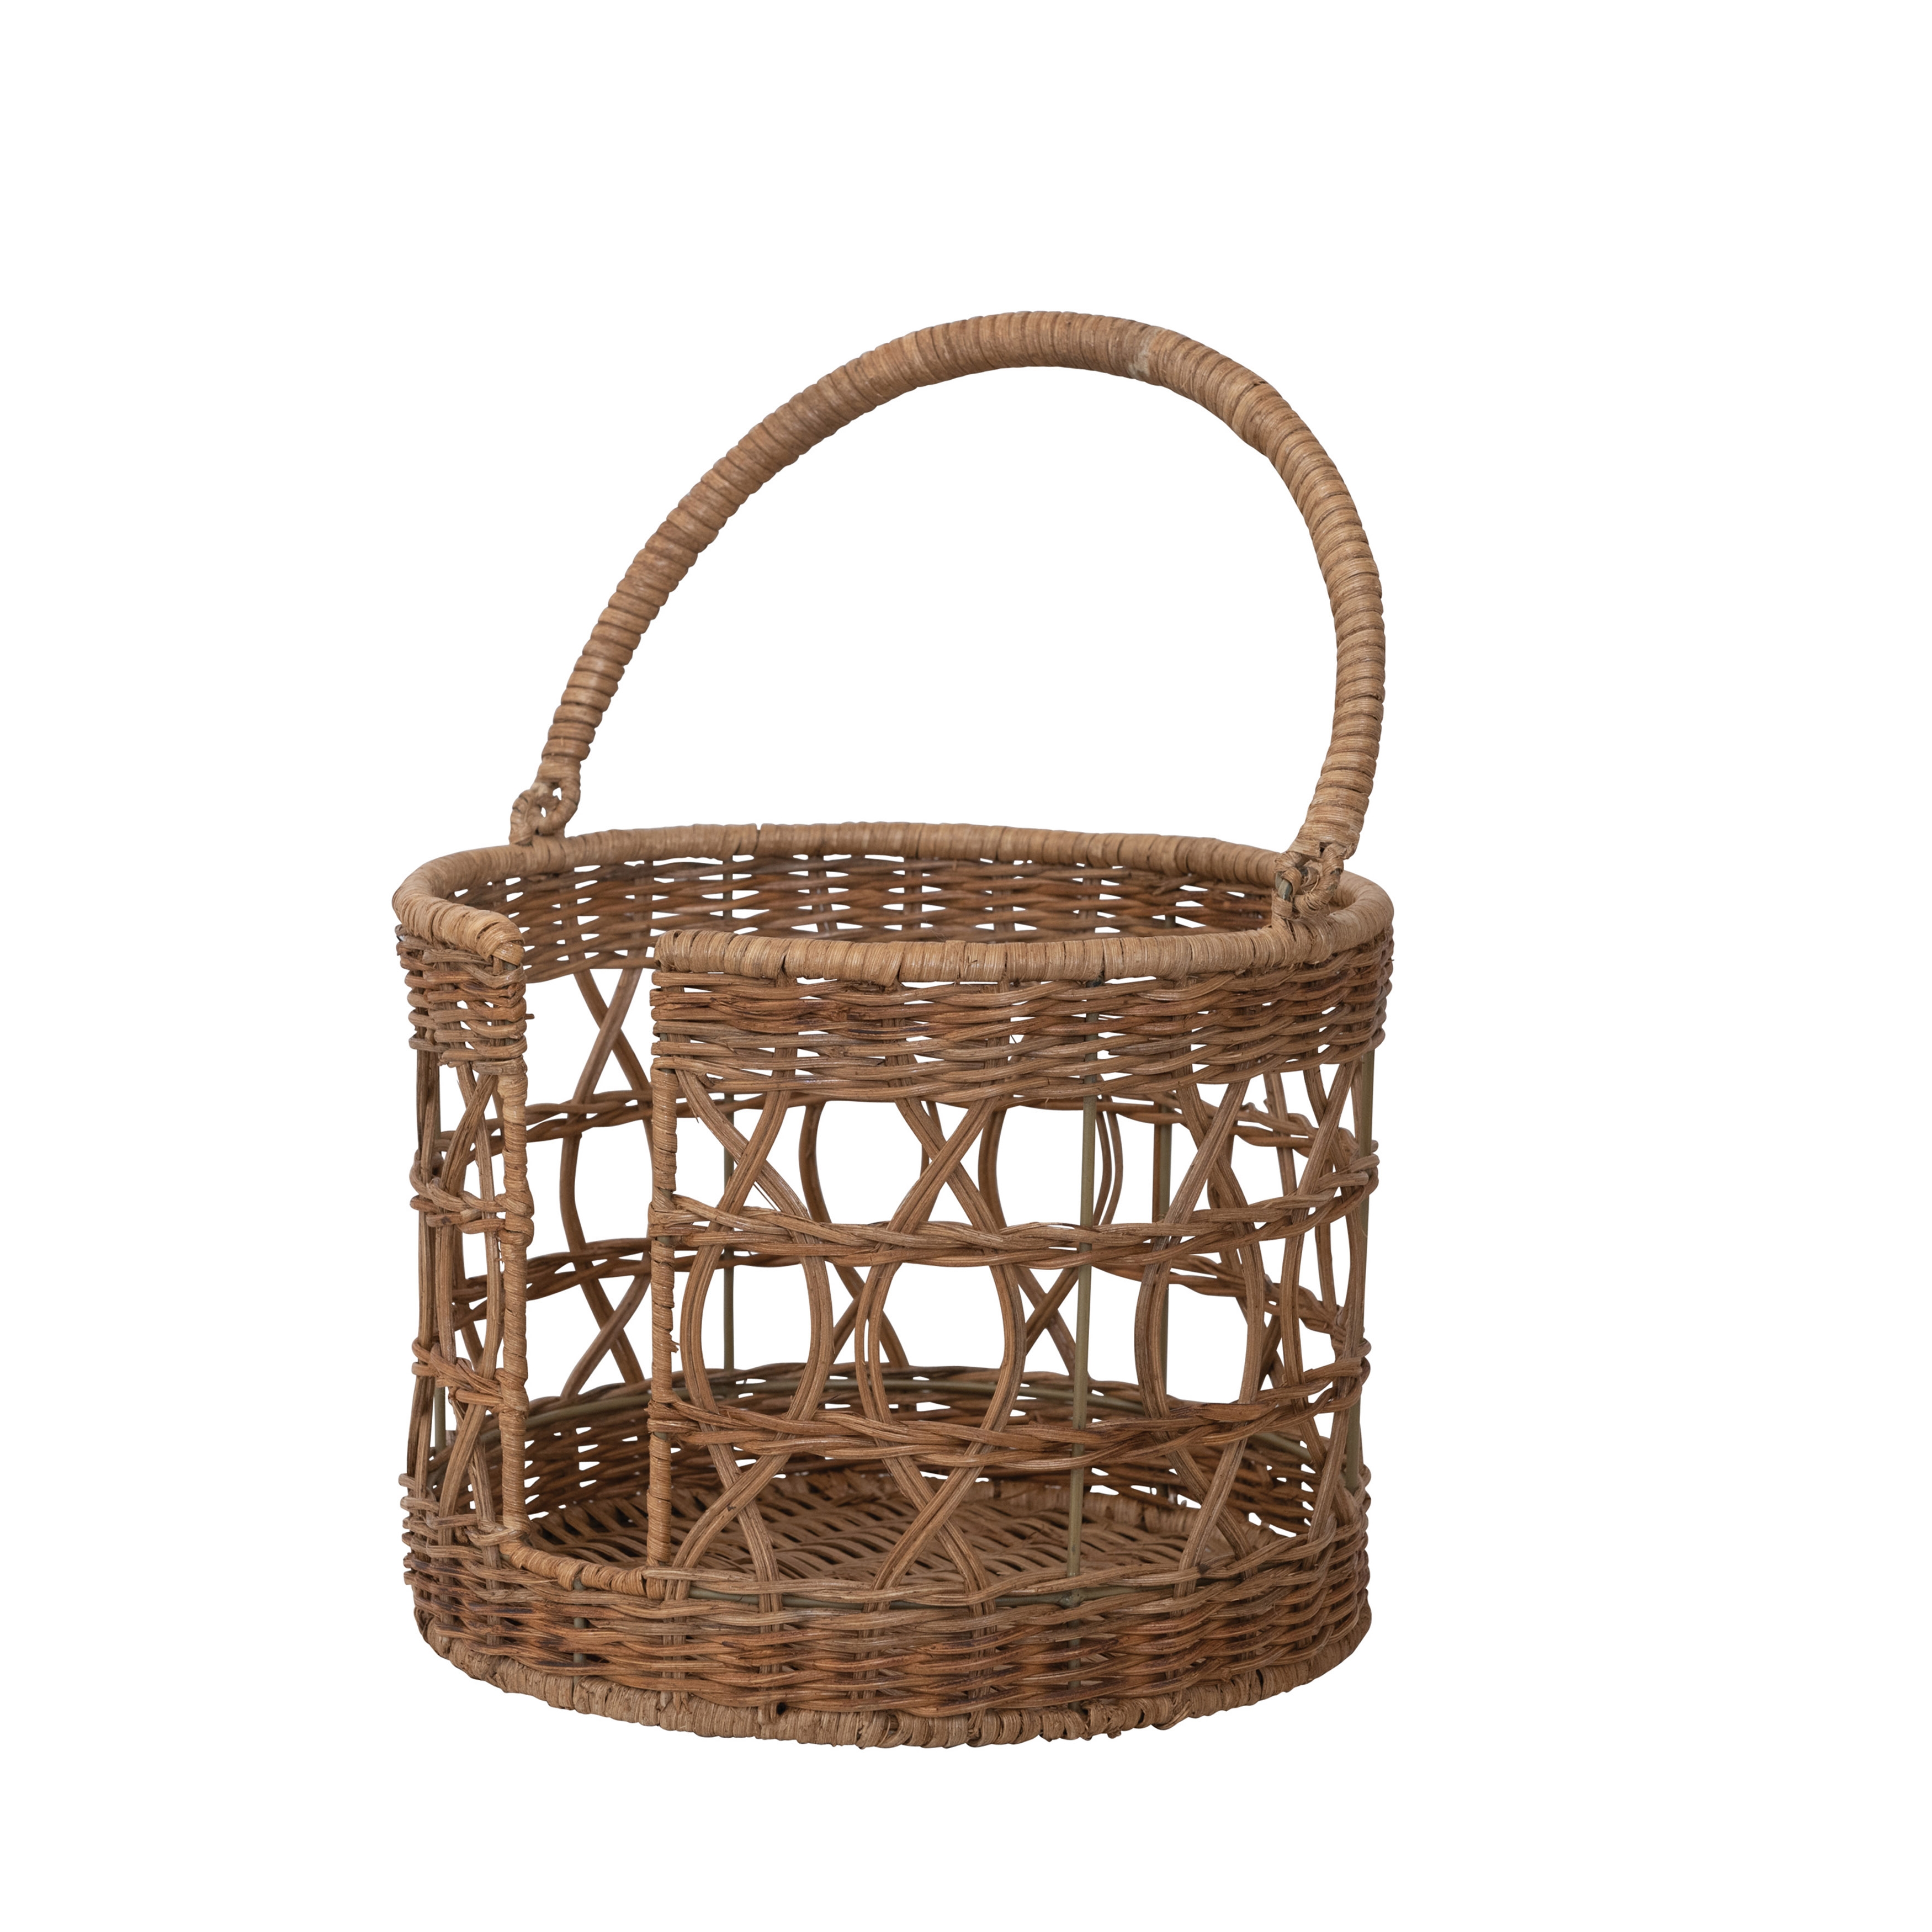  Handwoven Wicker Plate Basket with Handle, Natural - Image 0